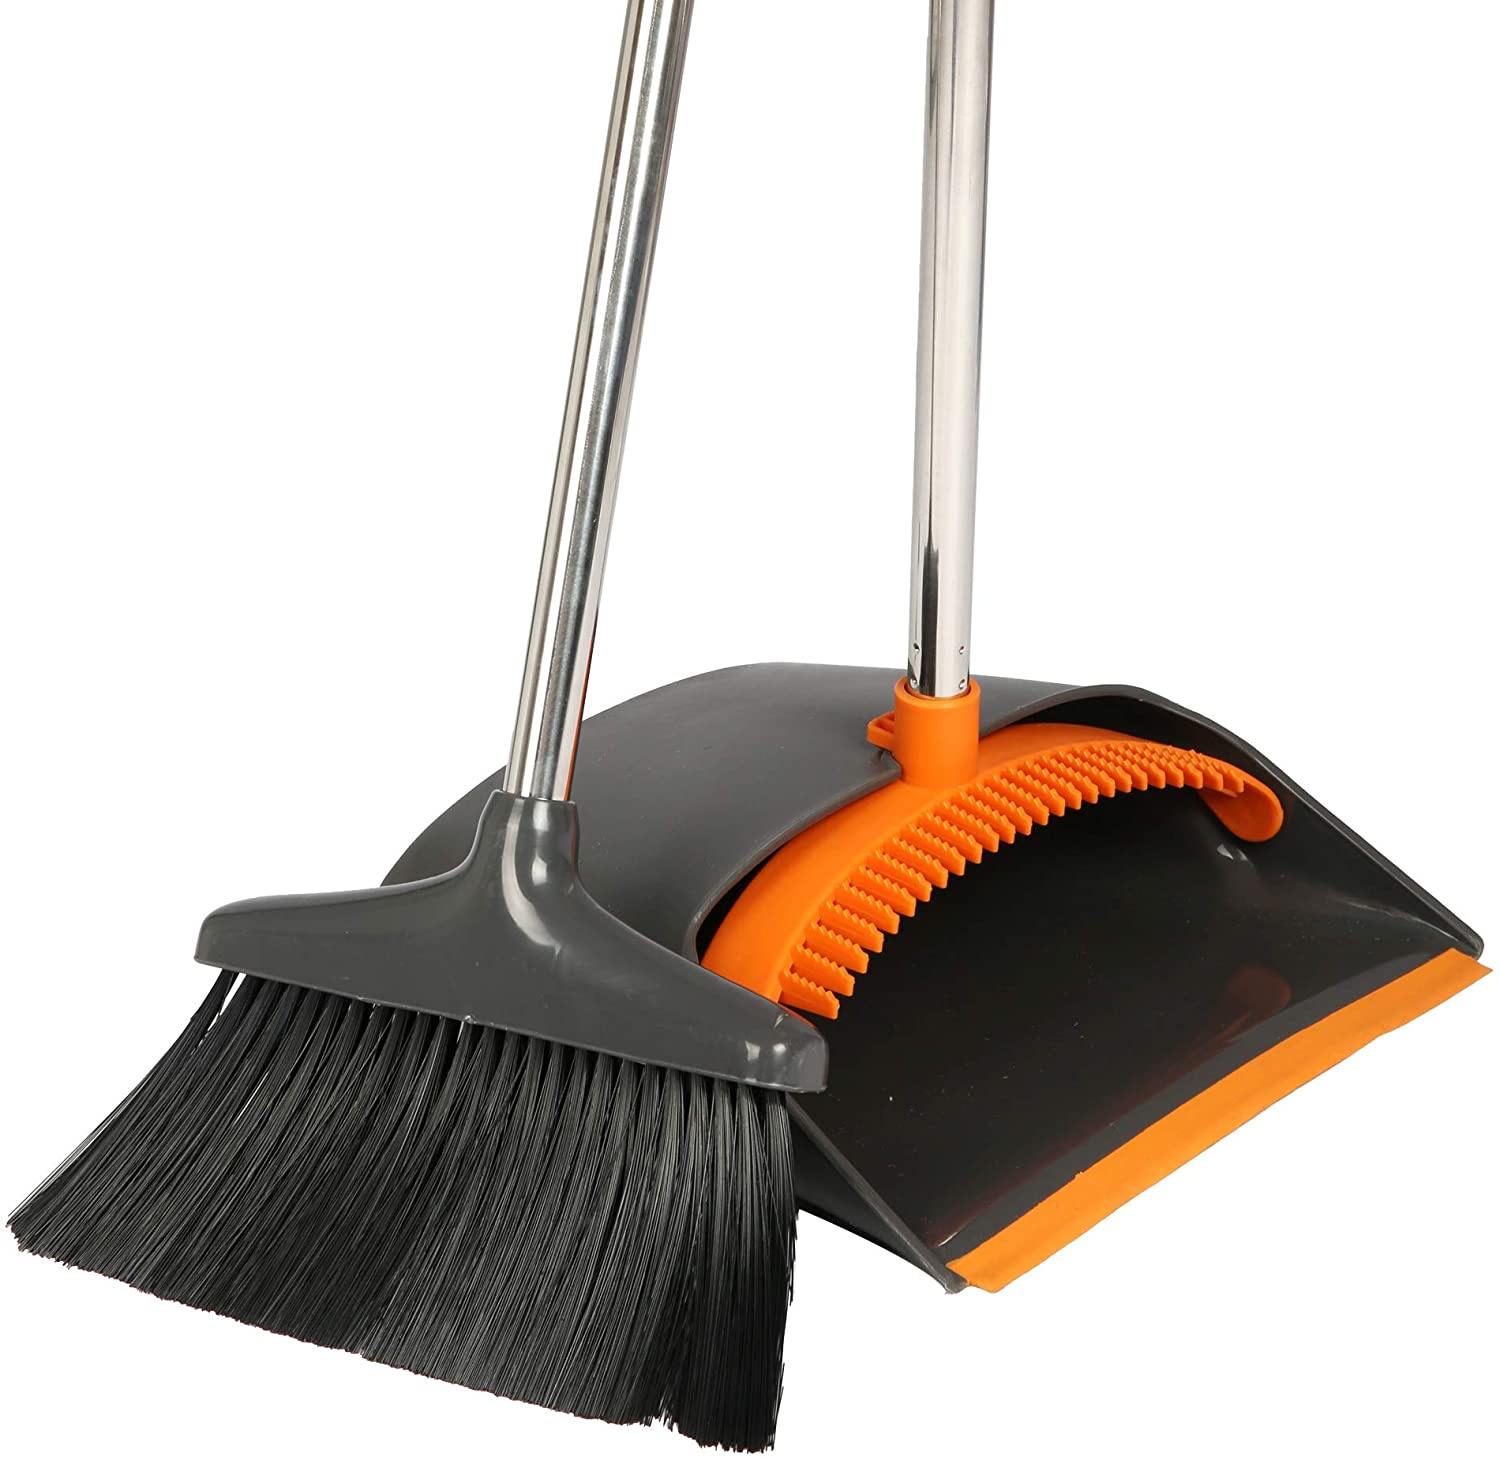 Broom and Dustpan Set Long Handle Lightweight and Robust Sweep Set Easy Assembly for Pet Hair Dirty Corners, Home Office, Grey + Orange - Bosonshop